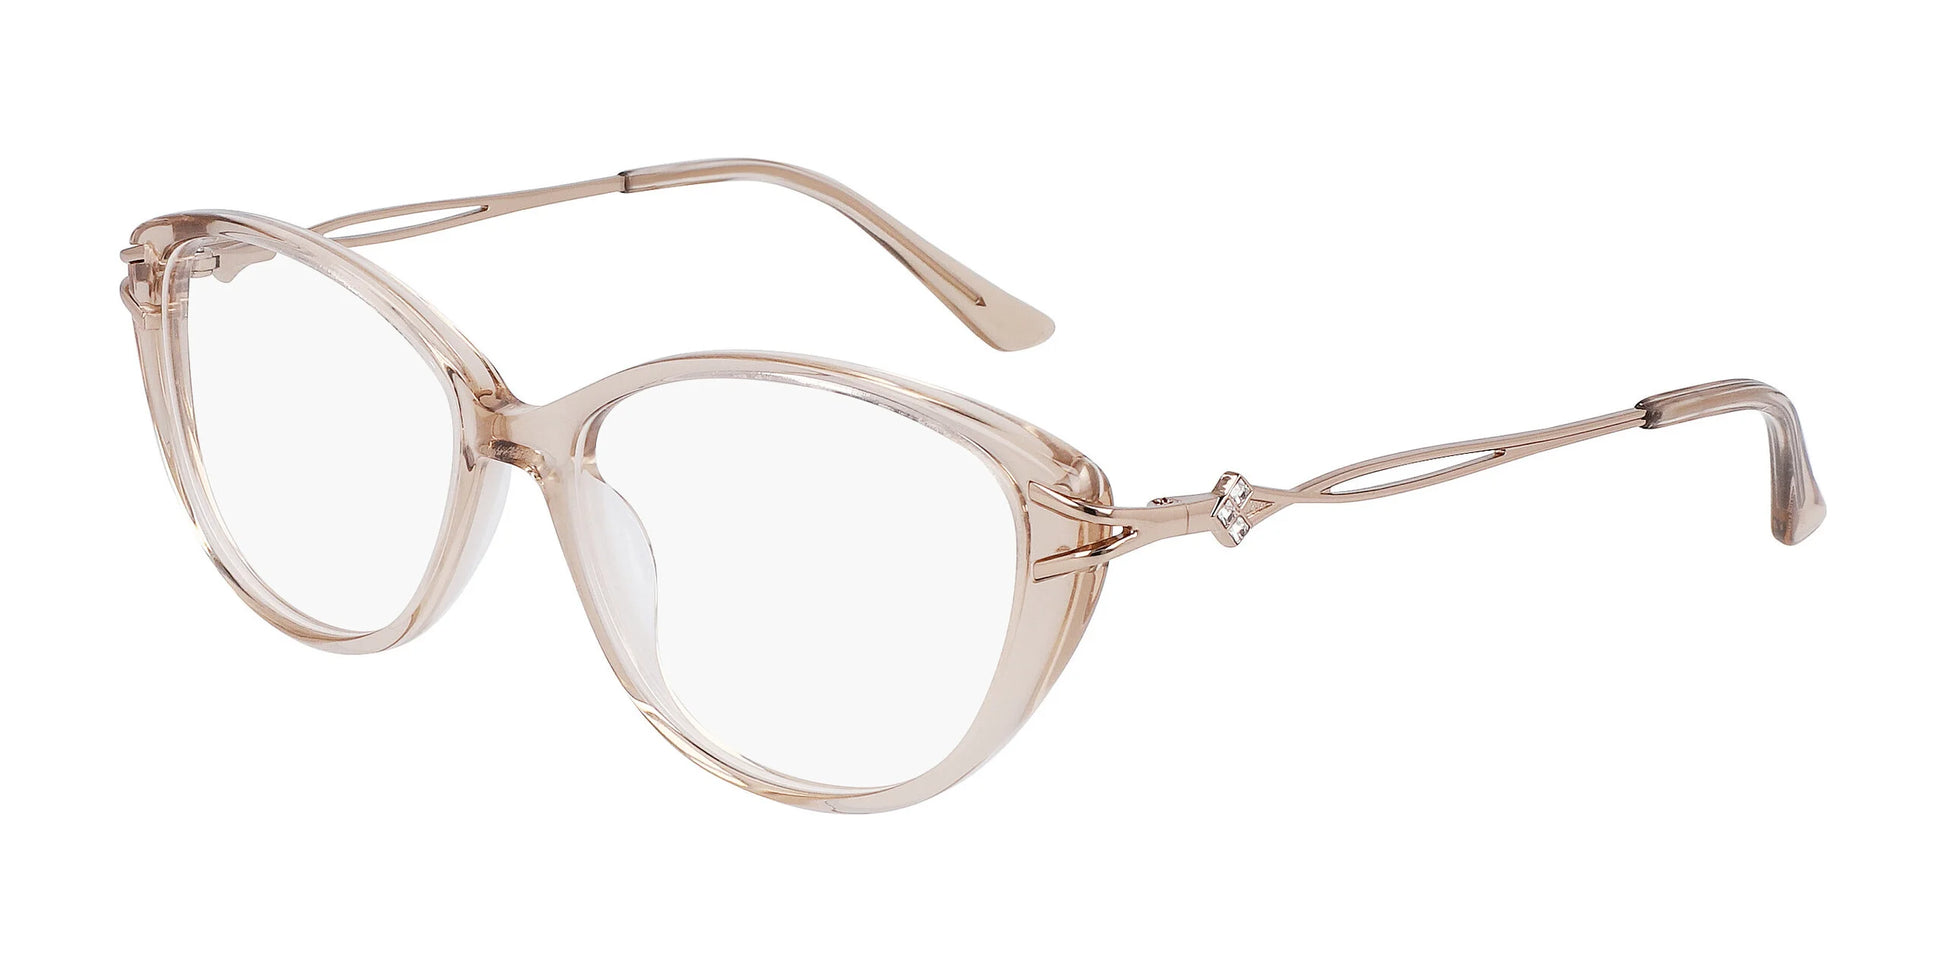 Marchon NYC TRES JOLIE 205 Eyeglasses Taupe Crystal